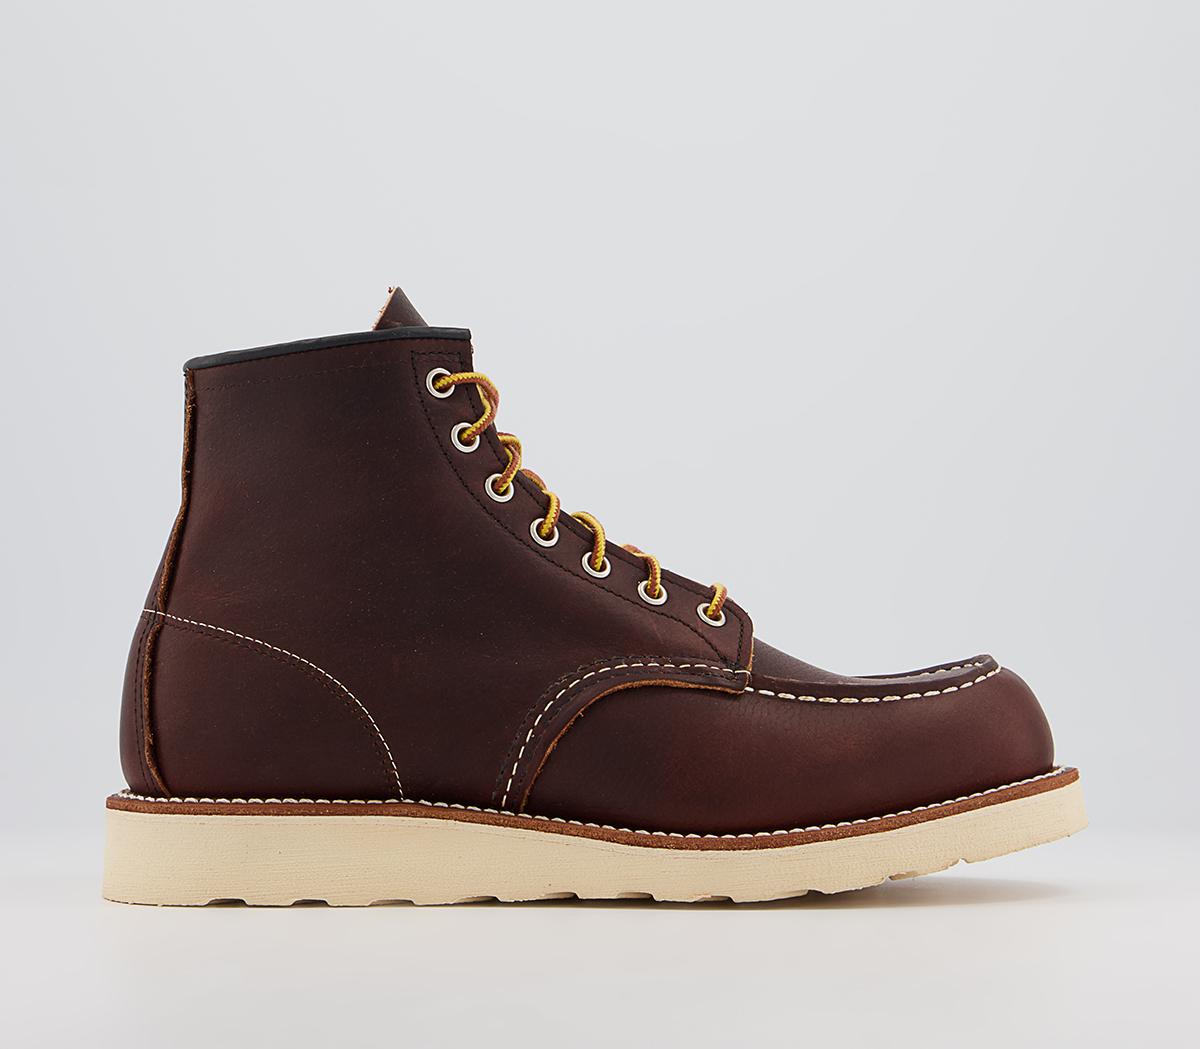 Red WingWork Wedge BootsBrown Leather